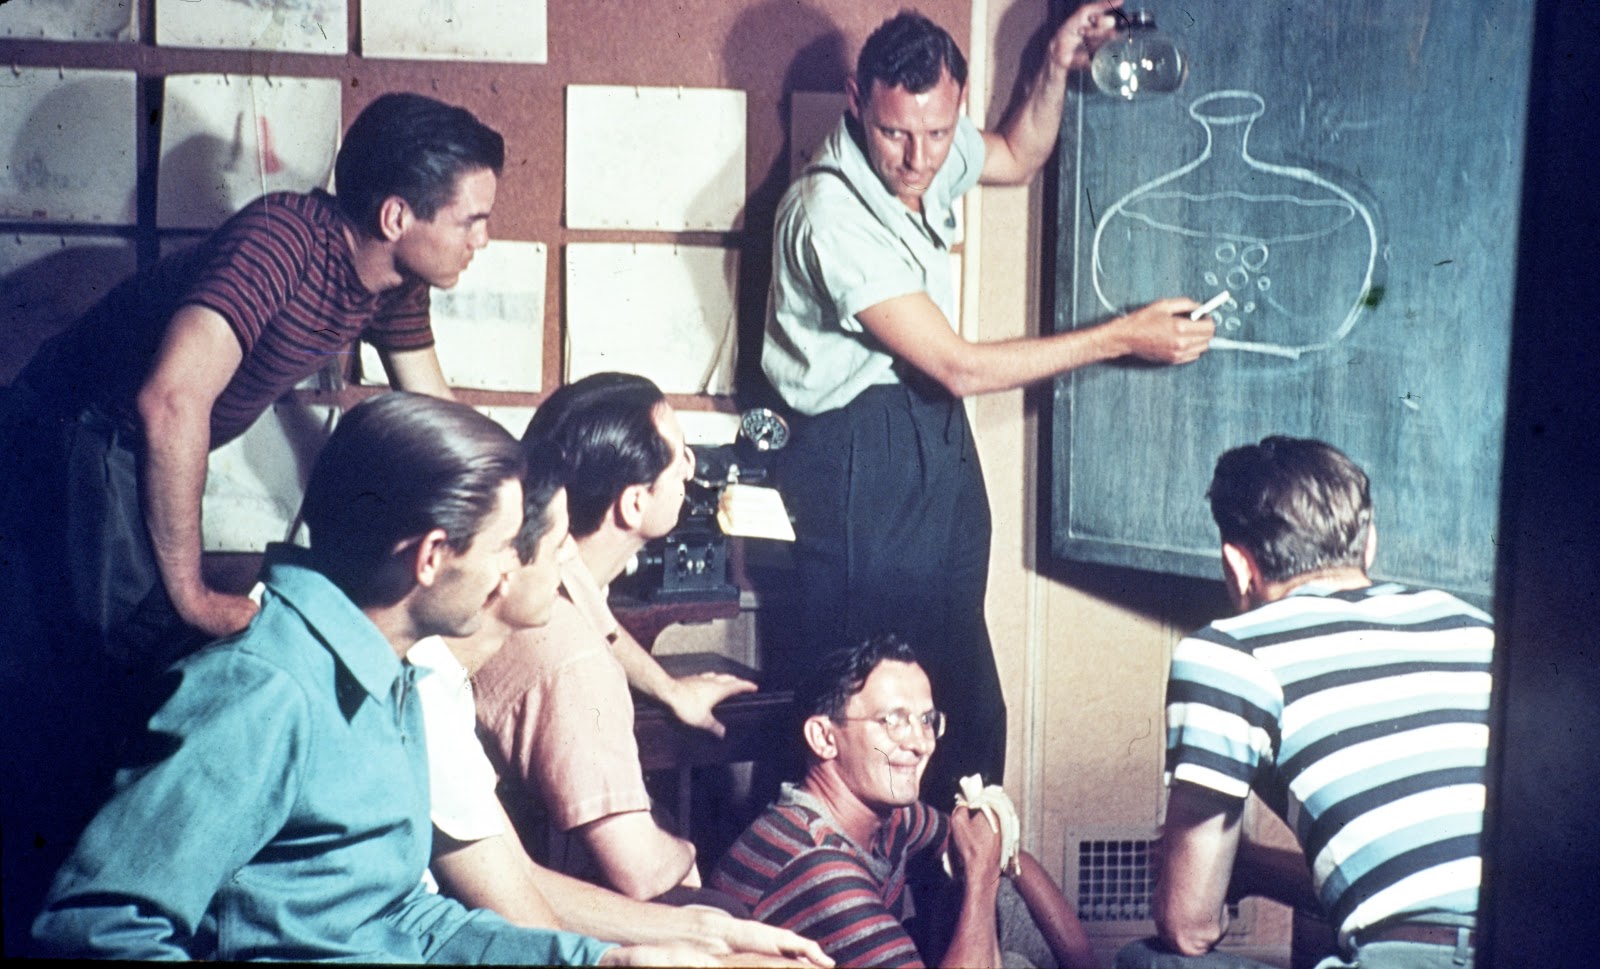 Workers at Disney discussing on how to animate water bubbles in Pinocchio, 1930s.